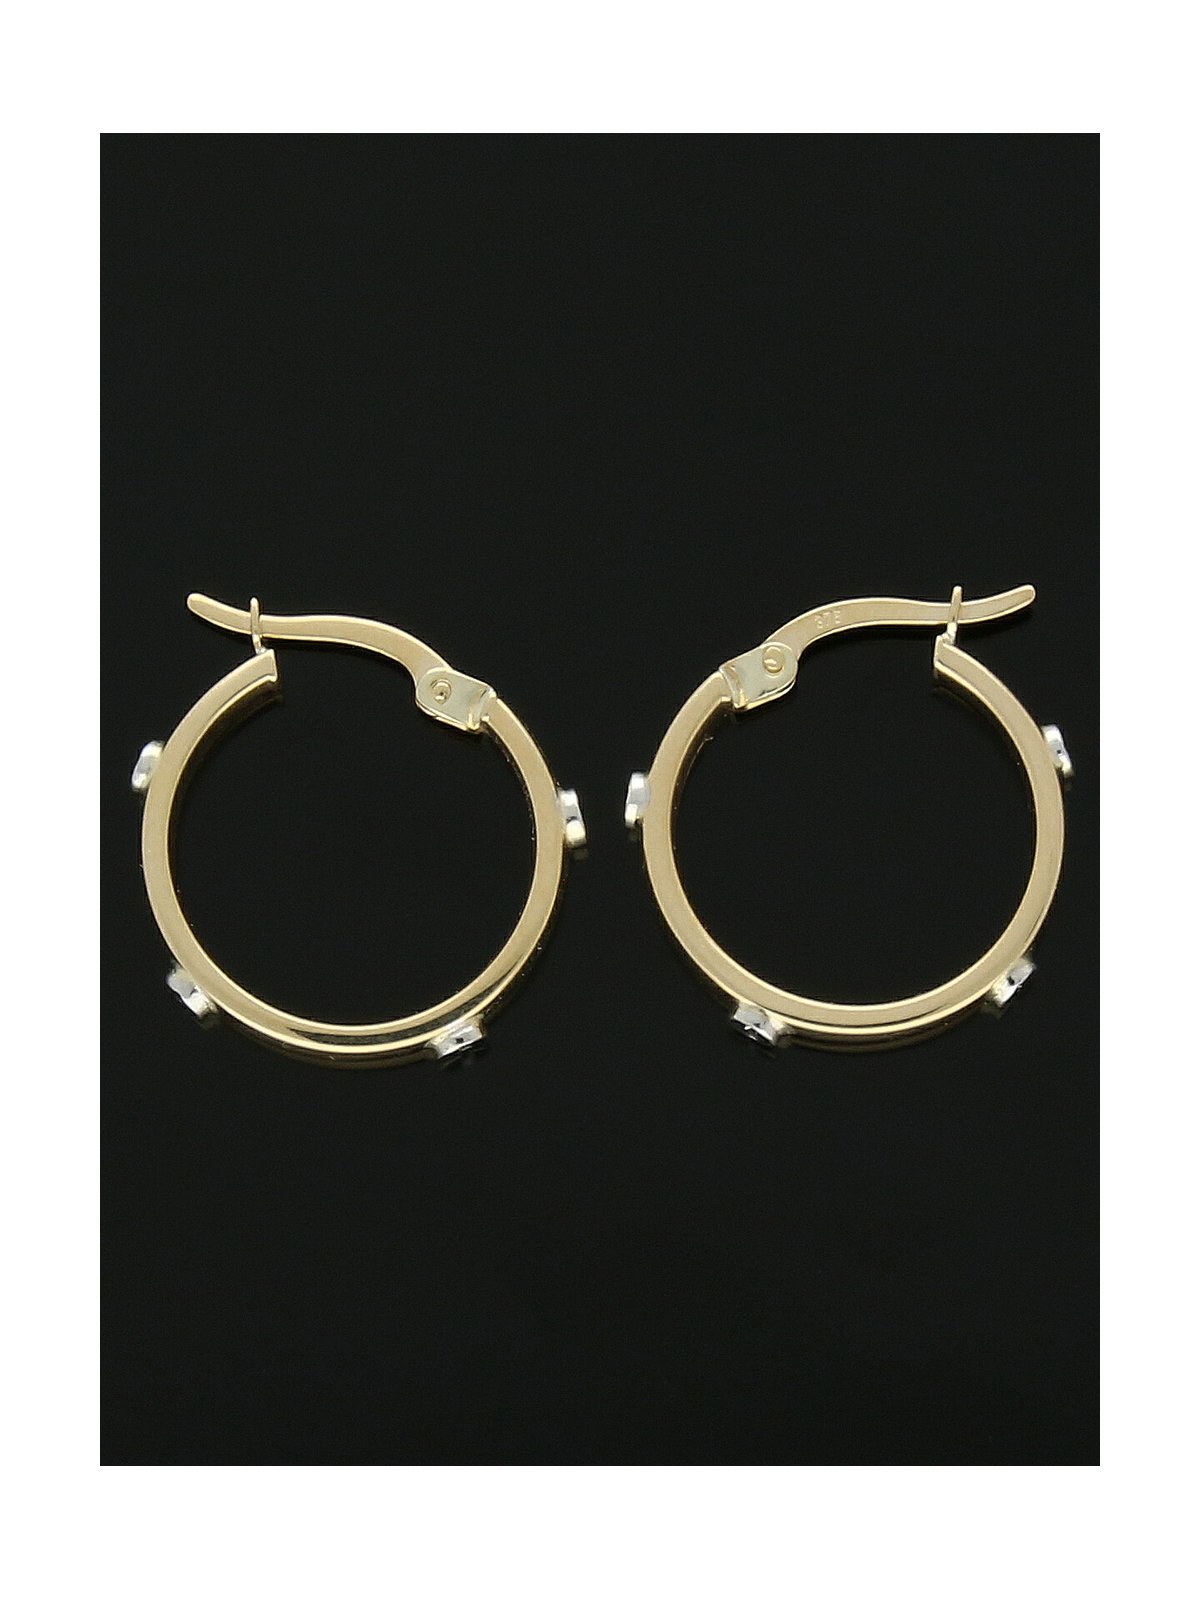 Round Hoop Earrings with Screw Design 19mm in 9ct Yellow and White Gold